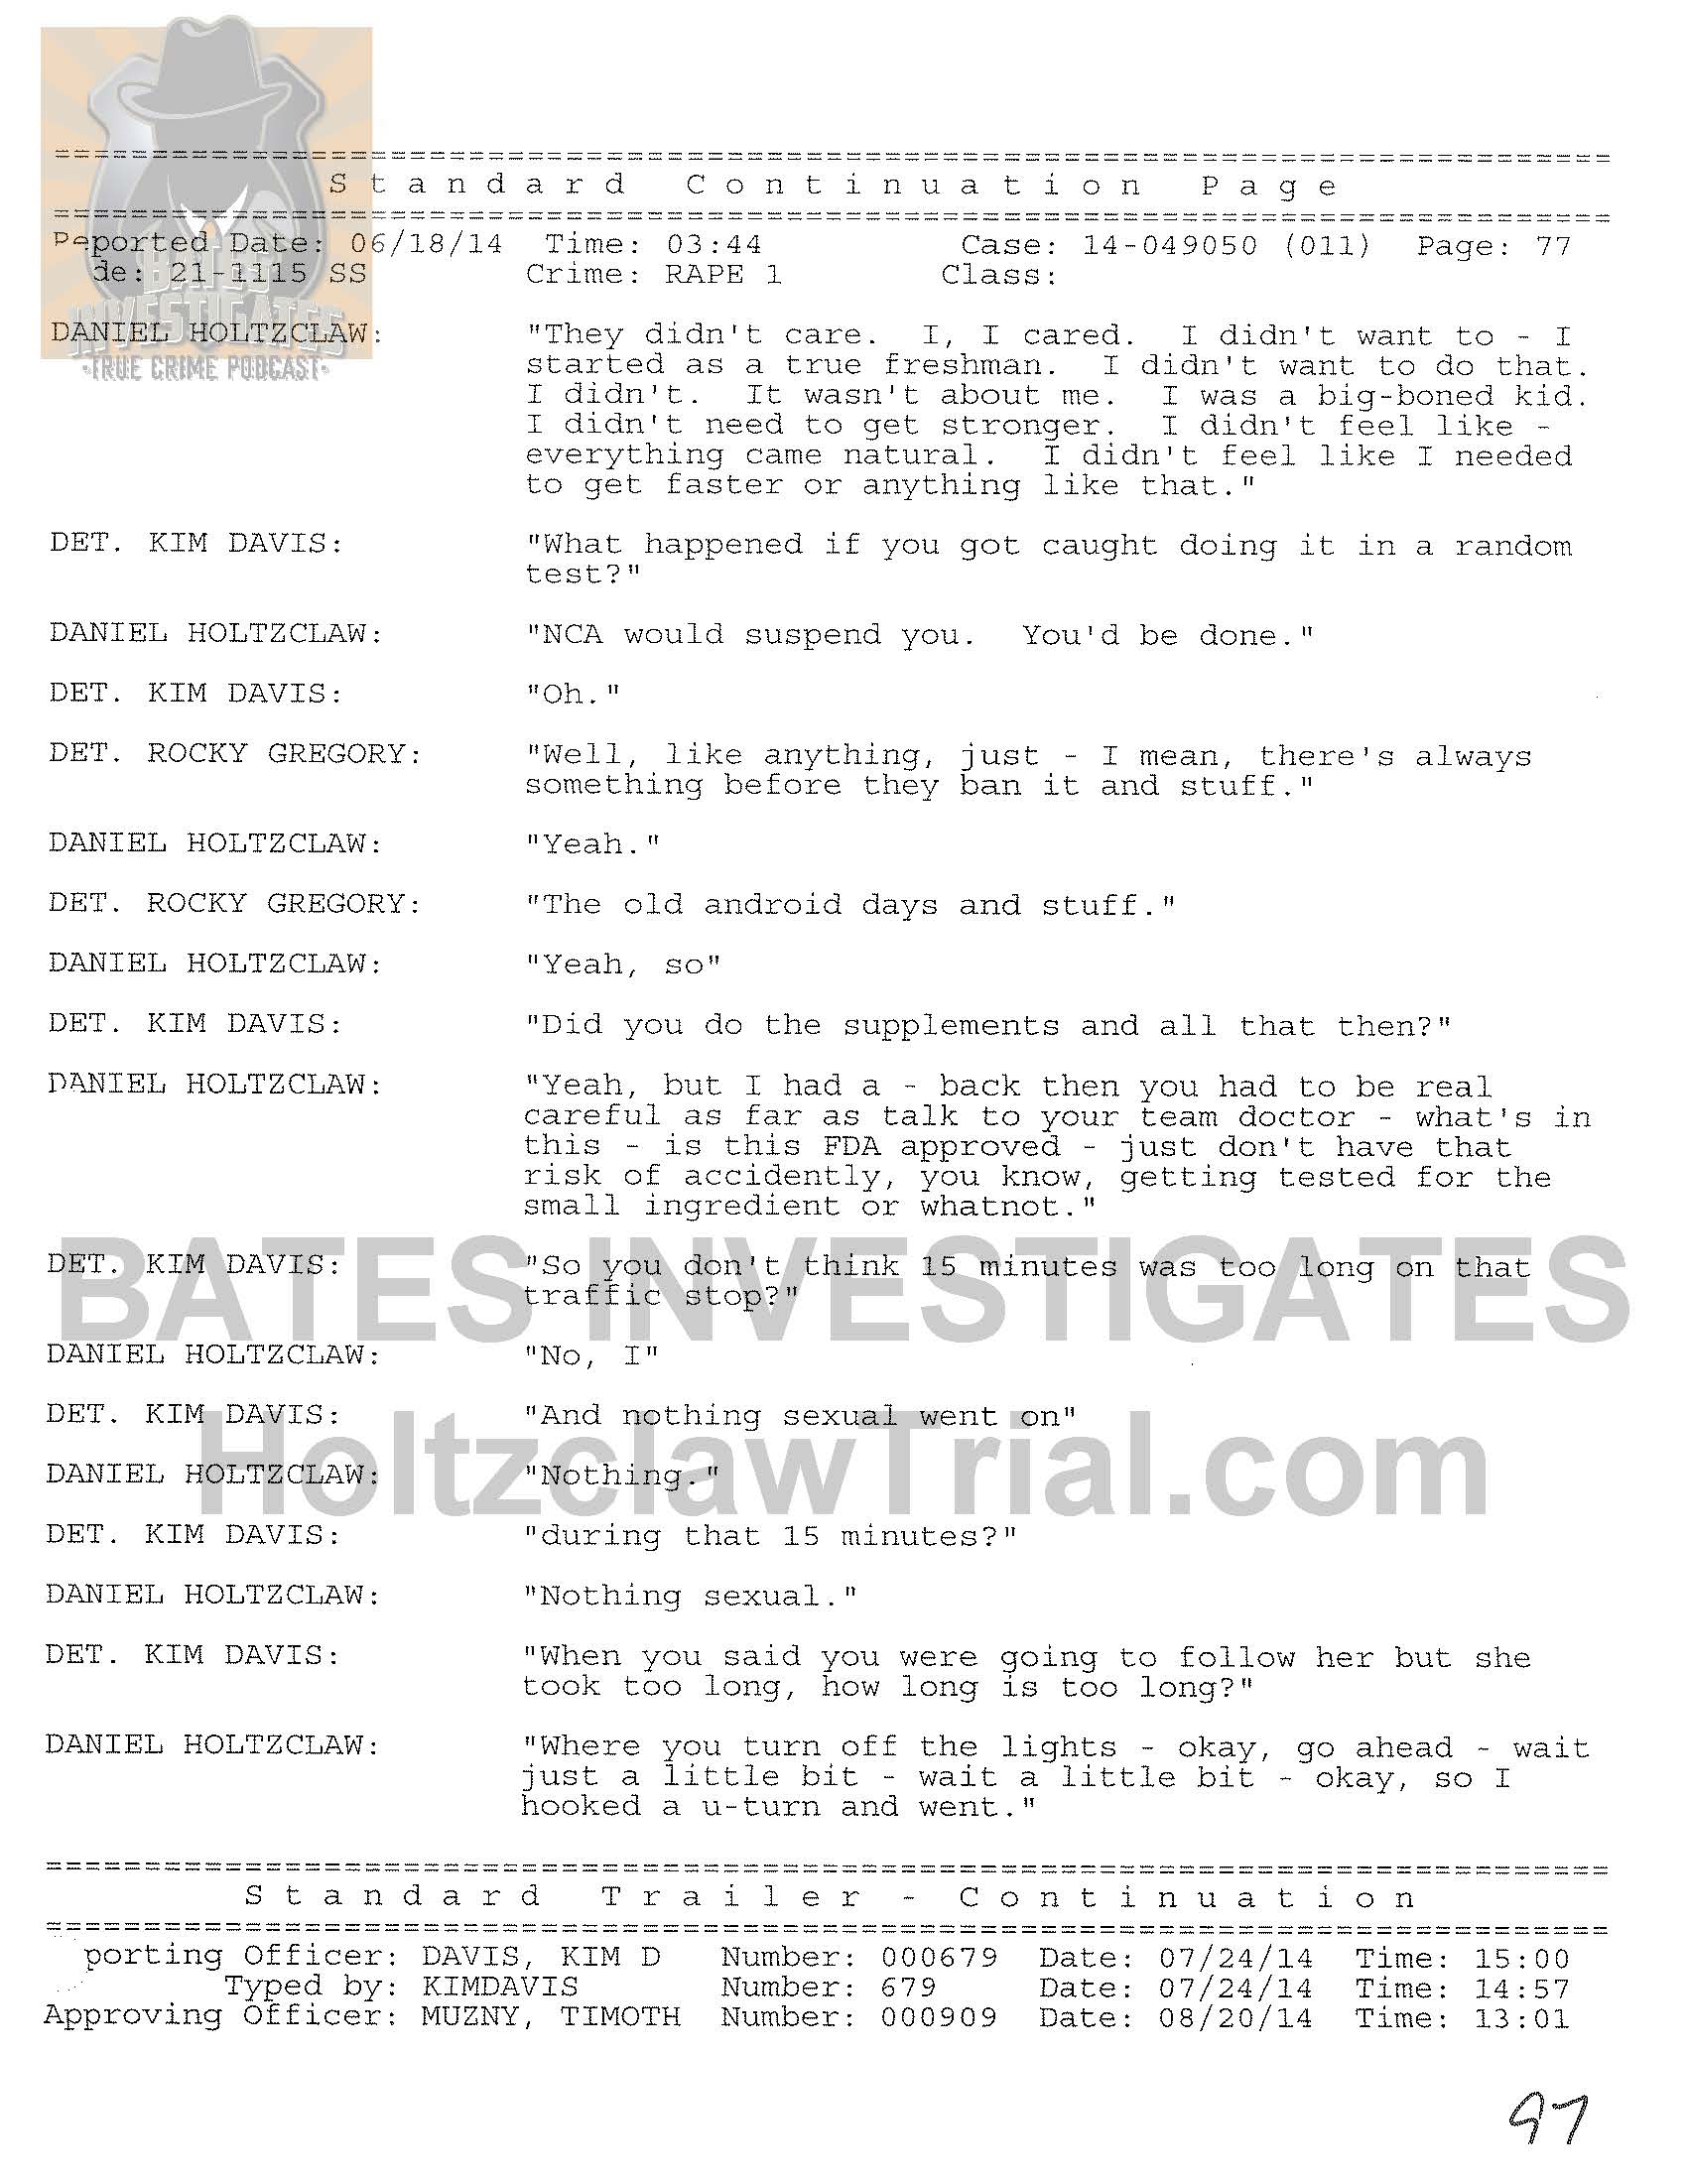 Holtzclaw Interrogation Transcript - Ep02 Redacted_Page_77.jpg